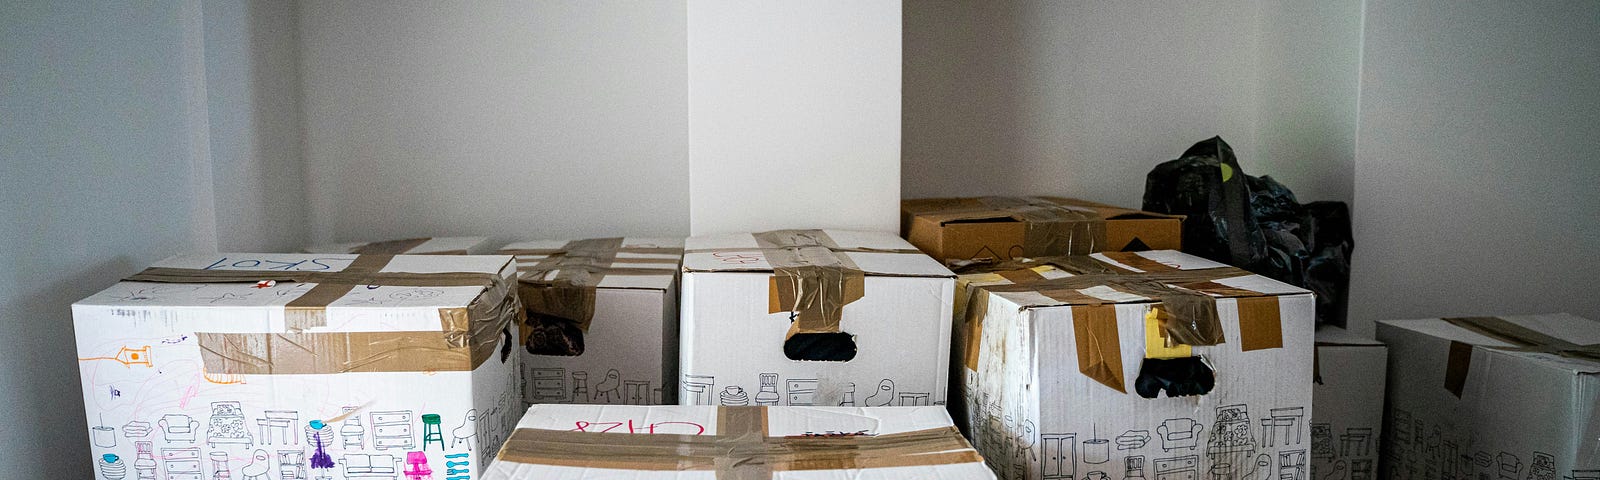 A room full of boxes waiting to be moved. Photo by Michal Balog on Unsplash